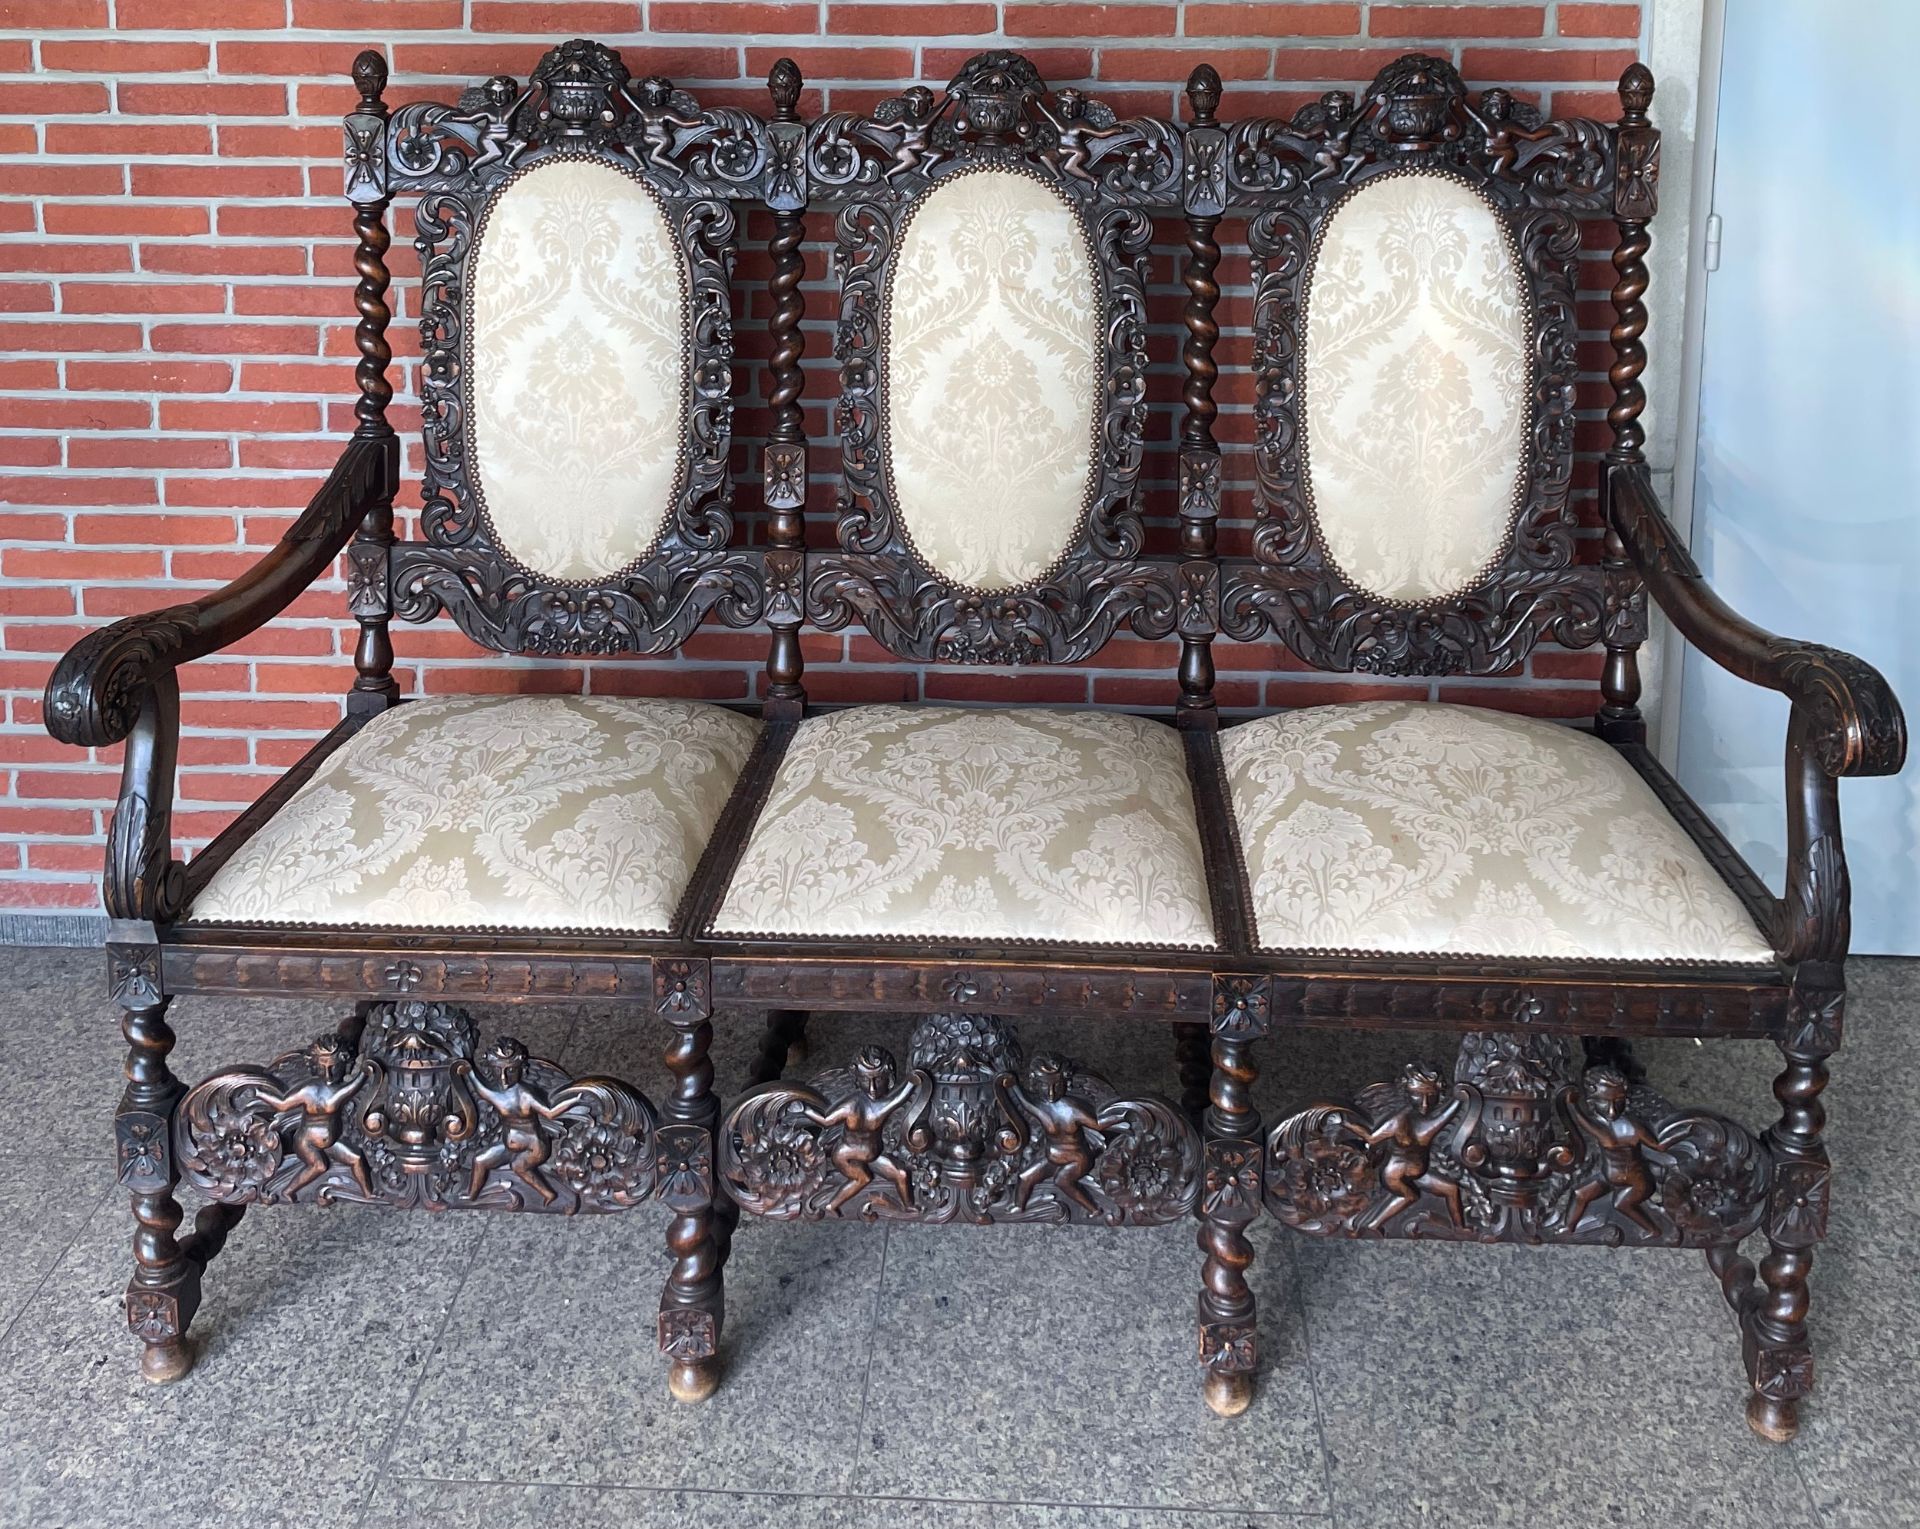 Heavily Carved  settee in late 17th century style. With Cherub Decoration Sofa  The triple-chair